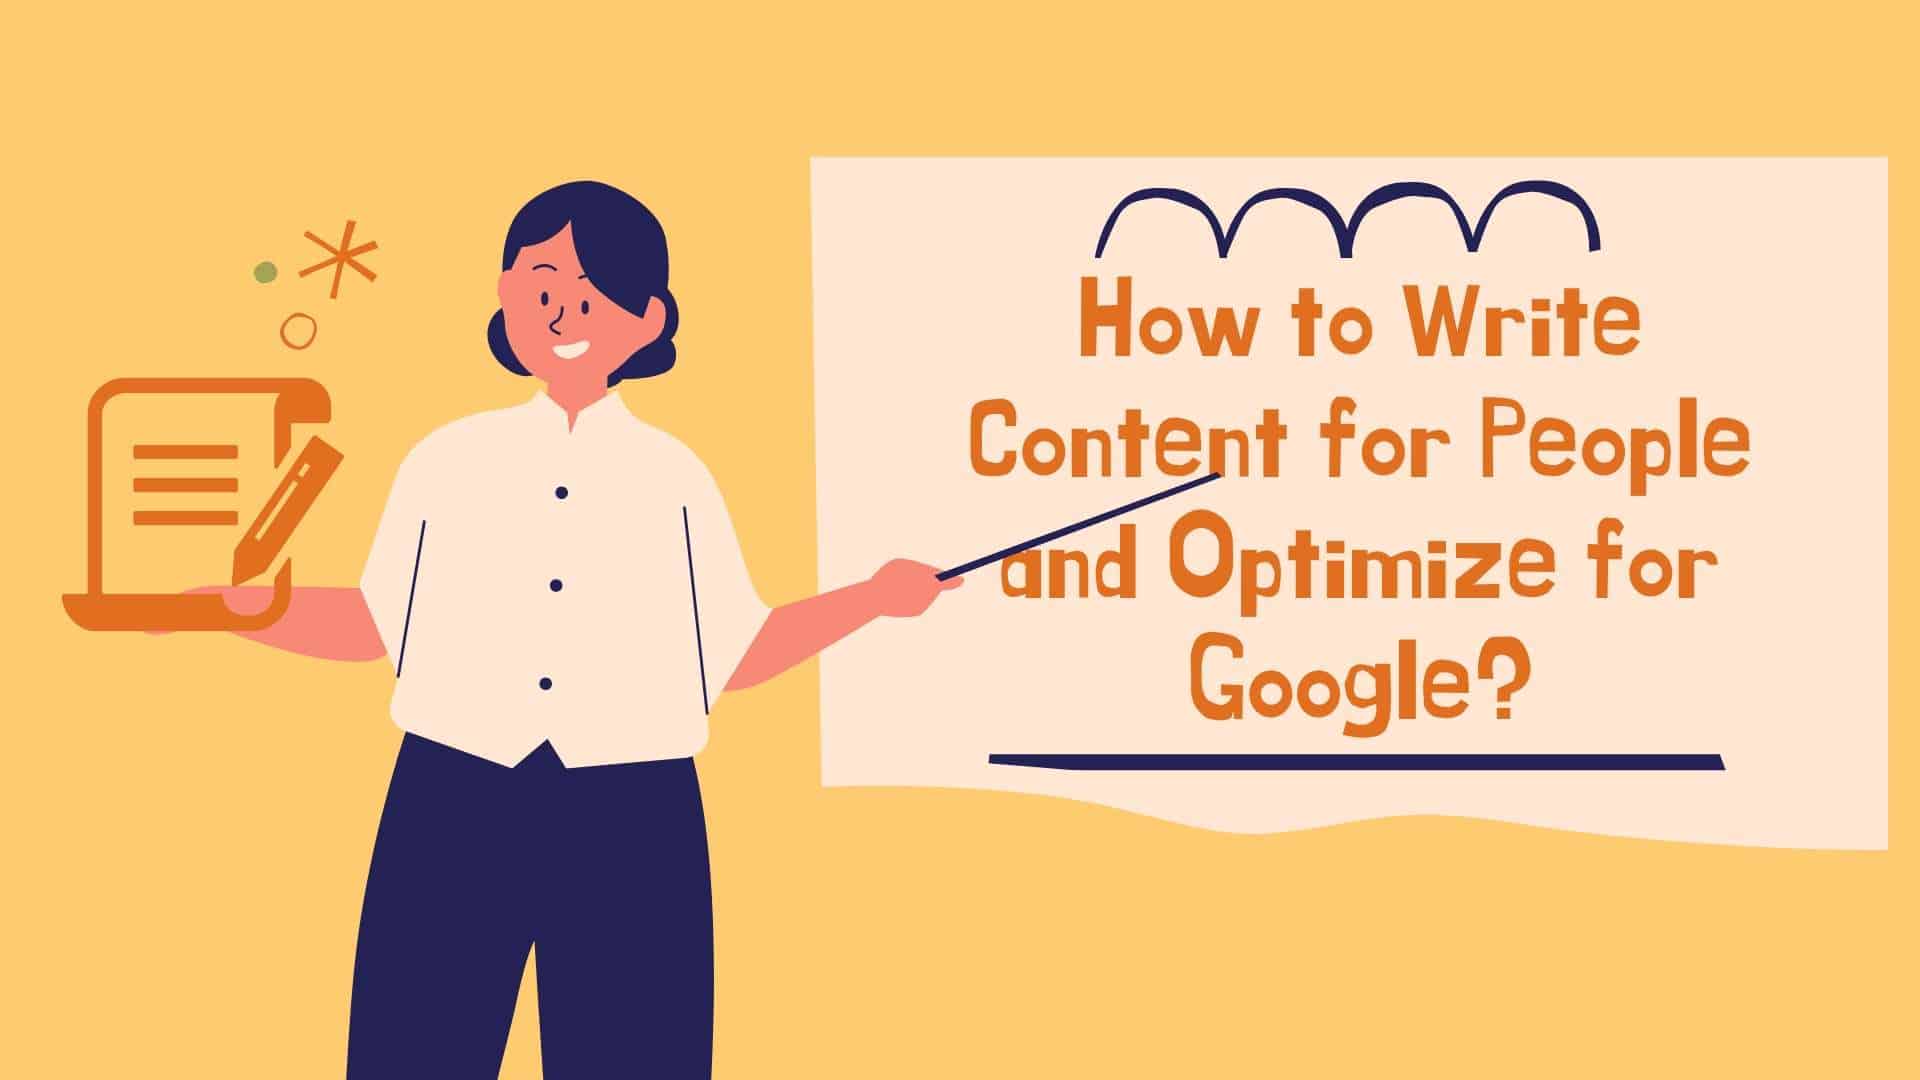 How to Write Content for People and Optimize for Google?